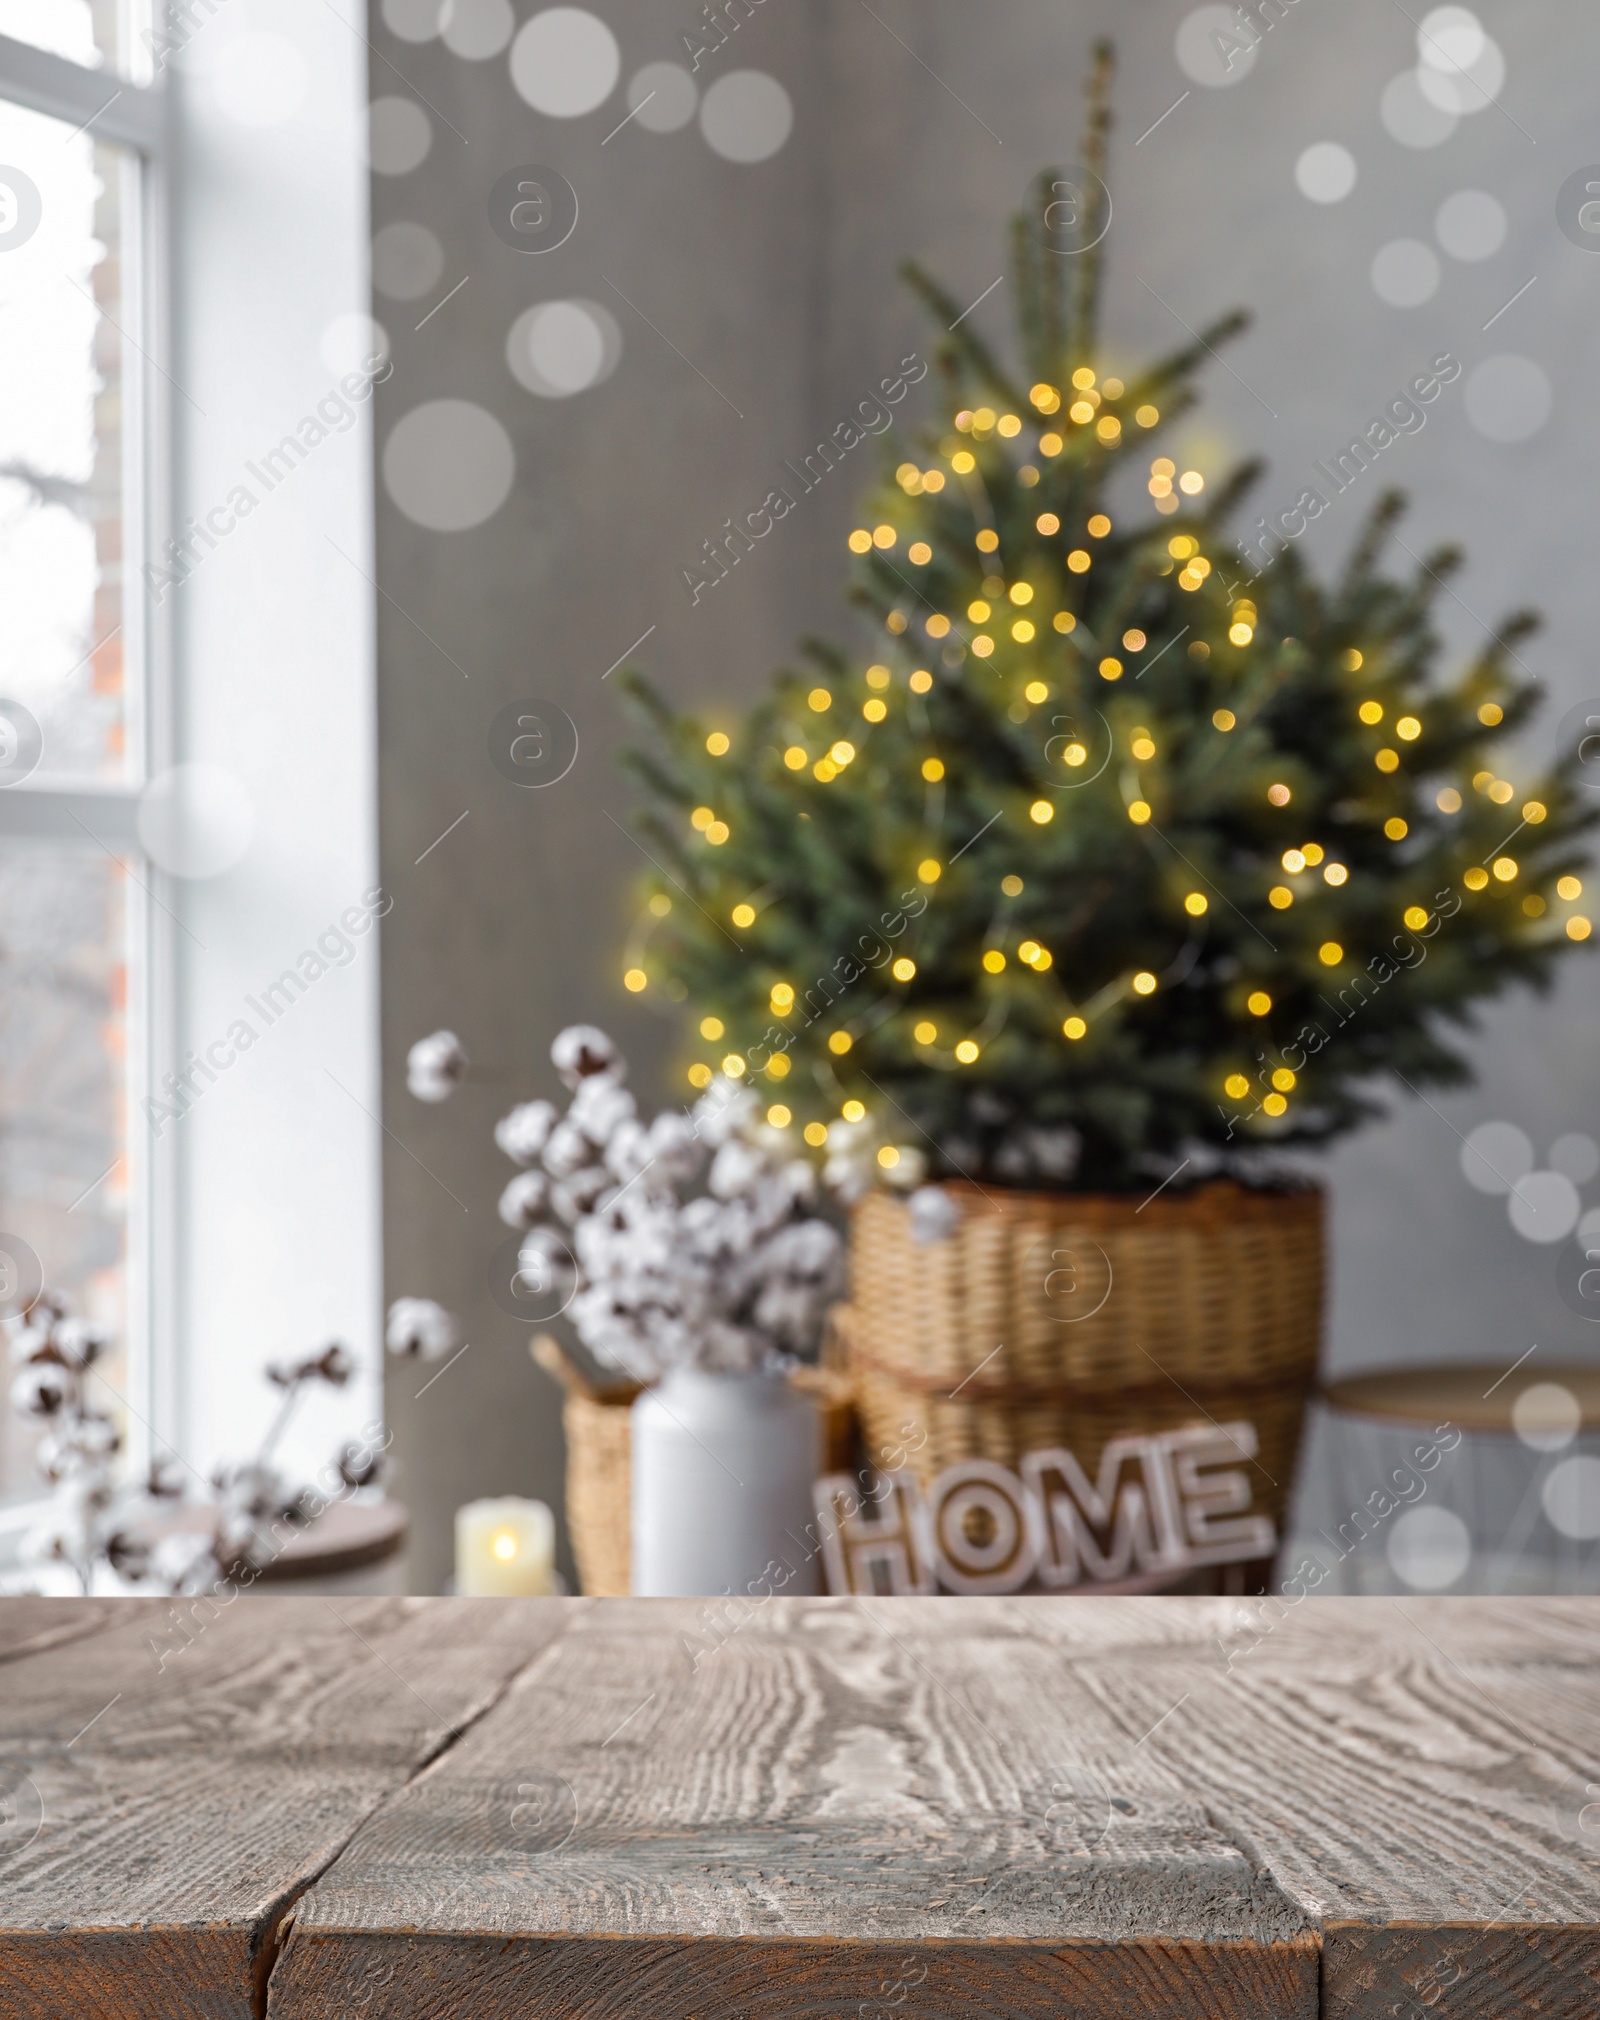 Image of Empty wooden surface and blurred view of room decorated for Christmas